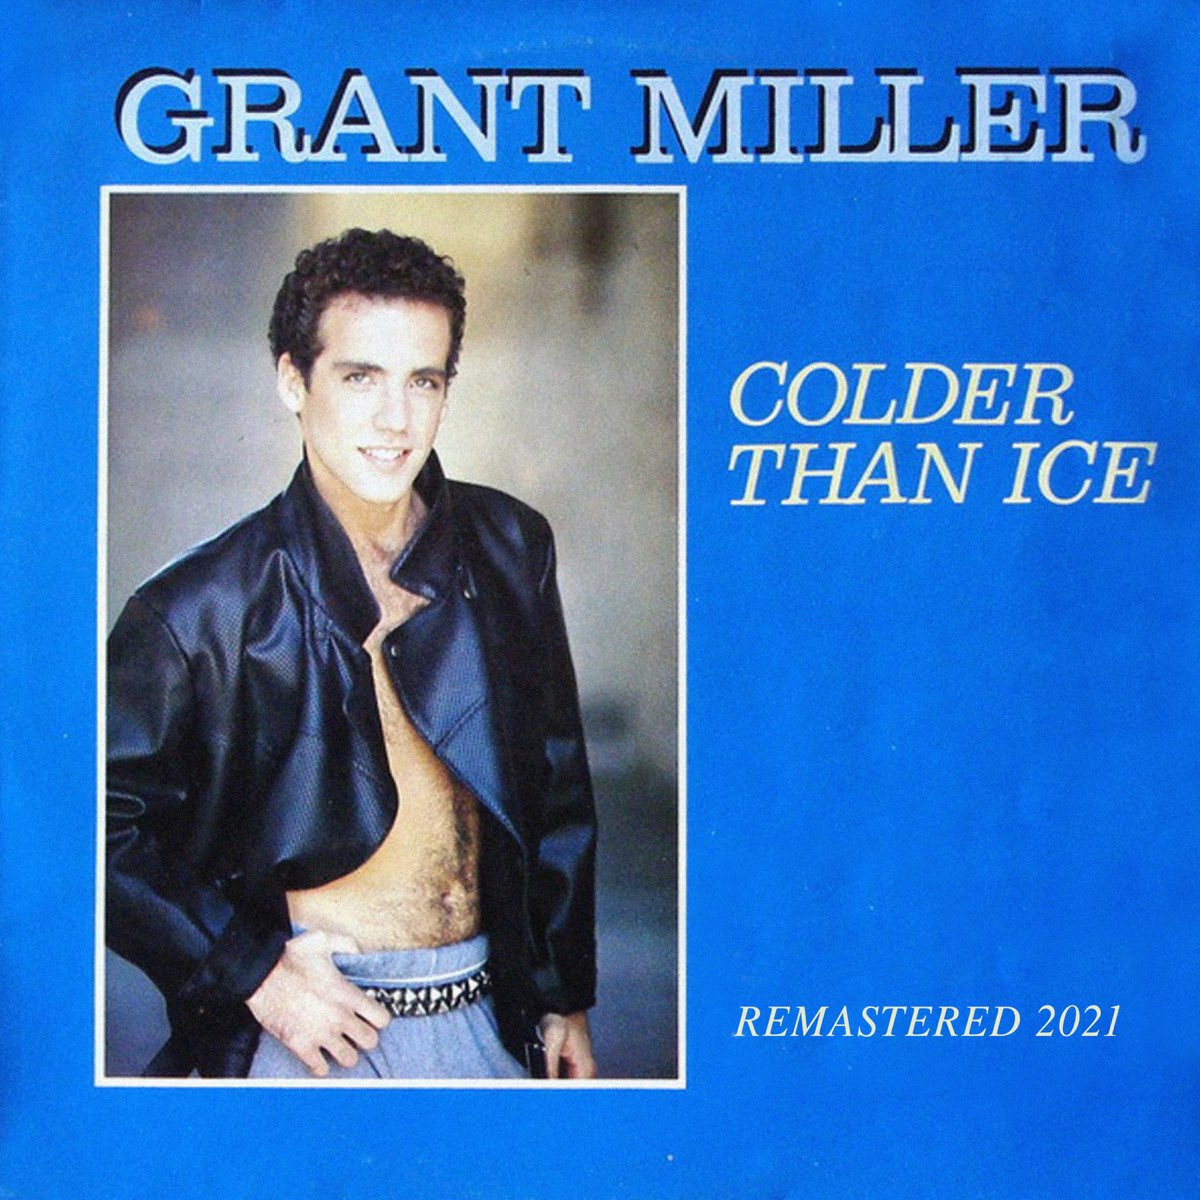 Гранд миллер. Грант Миллер. Grant Miller - Red for Love. Grant Miller фото. Ice Cold певец.